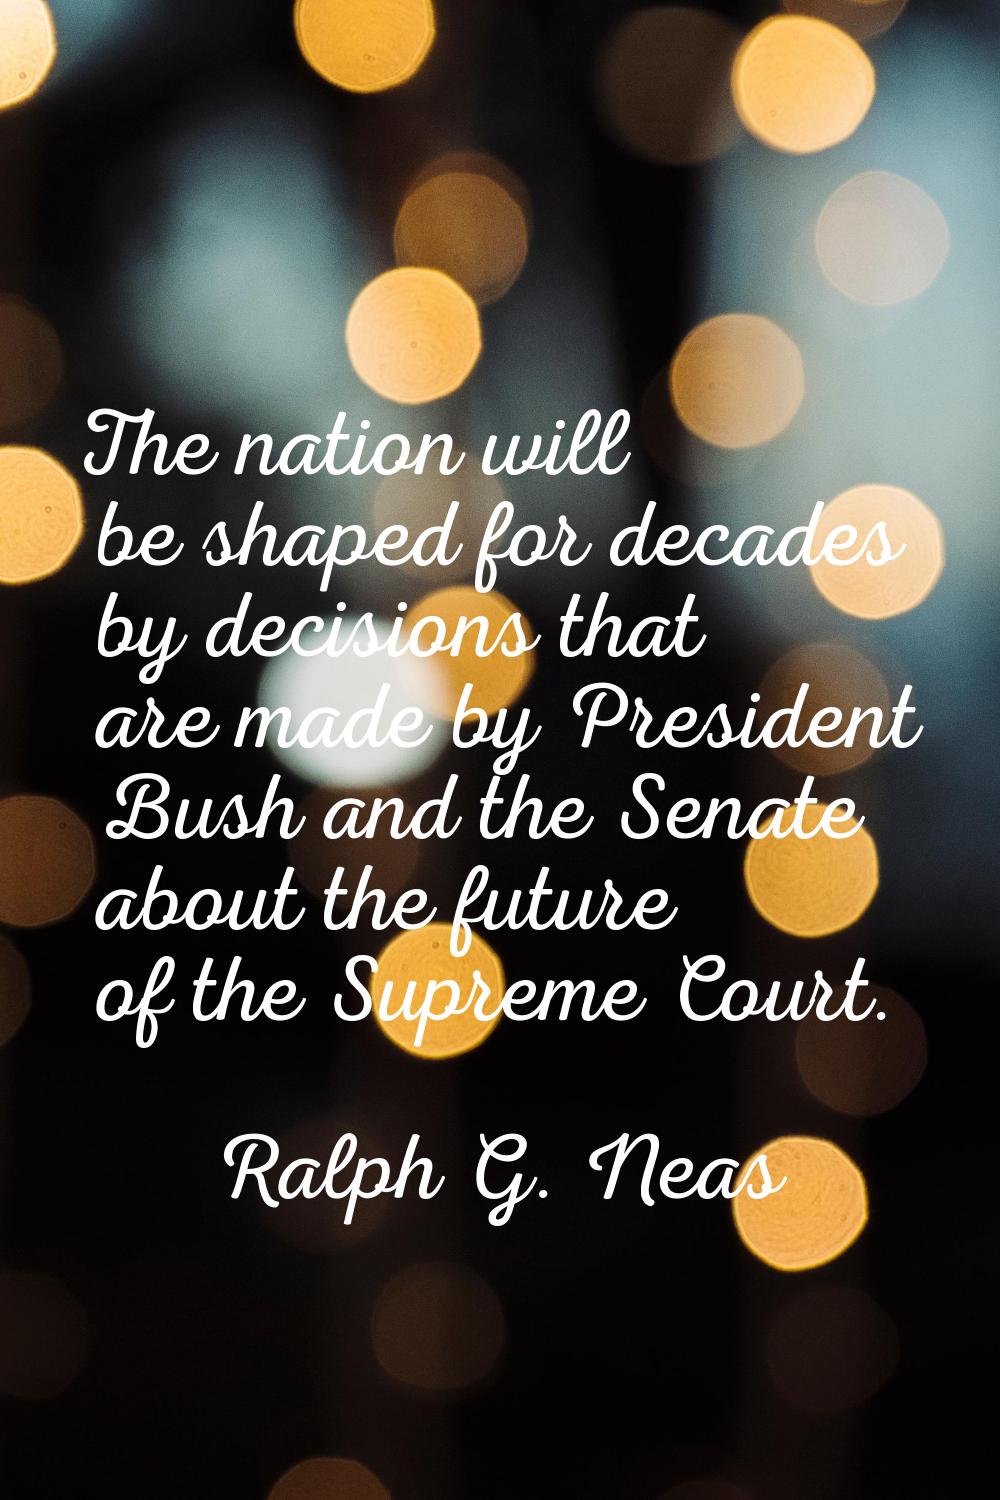 The nation will be shaped for decades by decisions that are made by President Bush and the Senate a